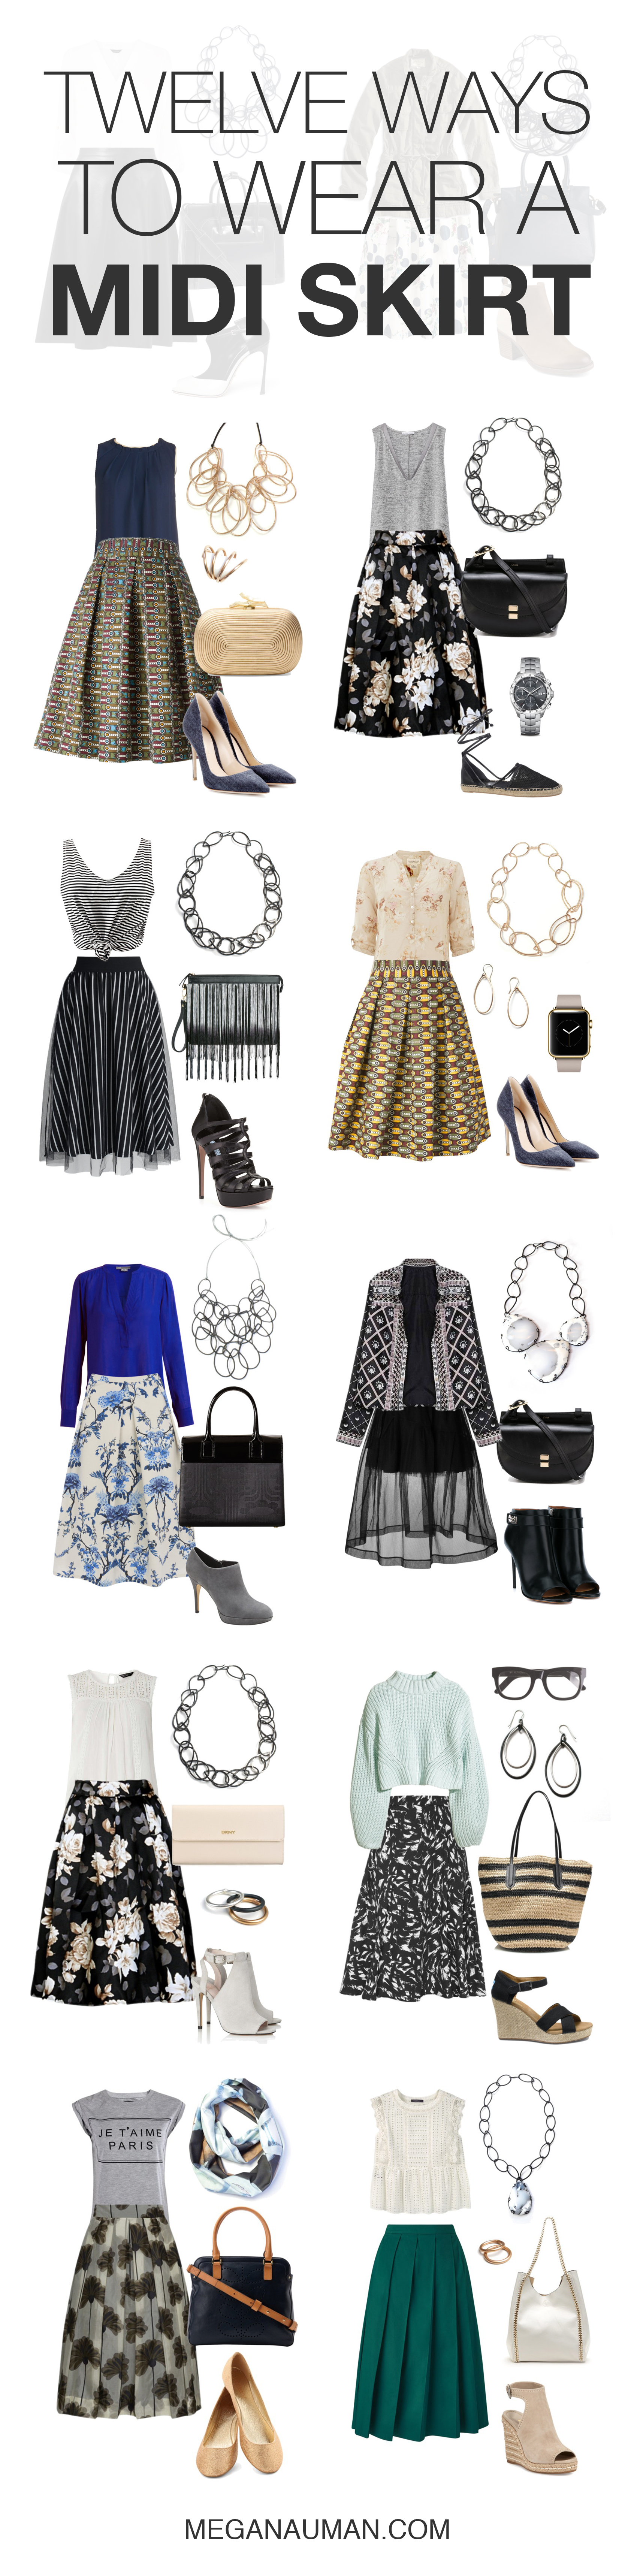 how to wear a midi skirt: 12 stylish outfit ideas to try // click through to see and shop all the looks